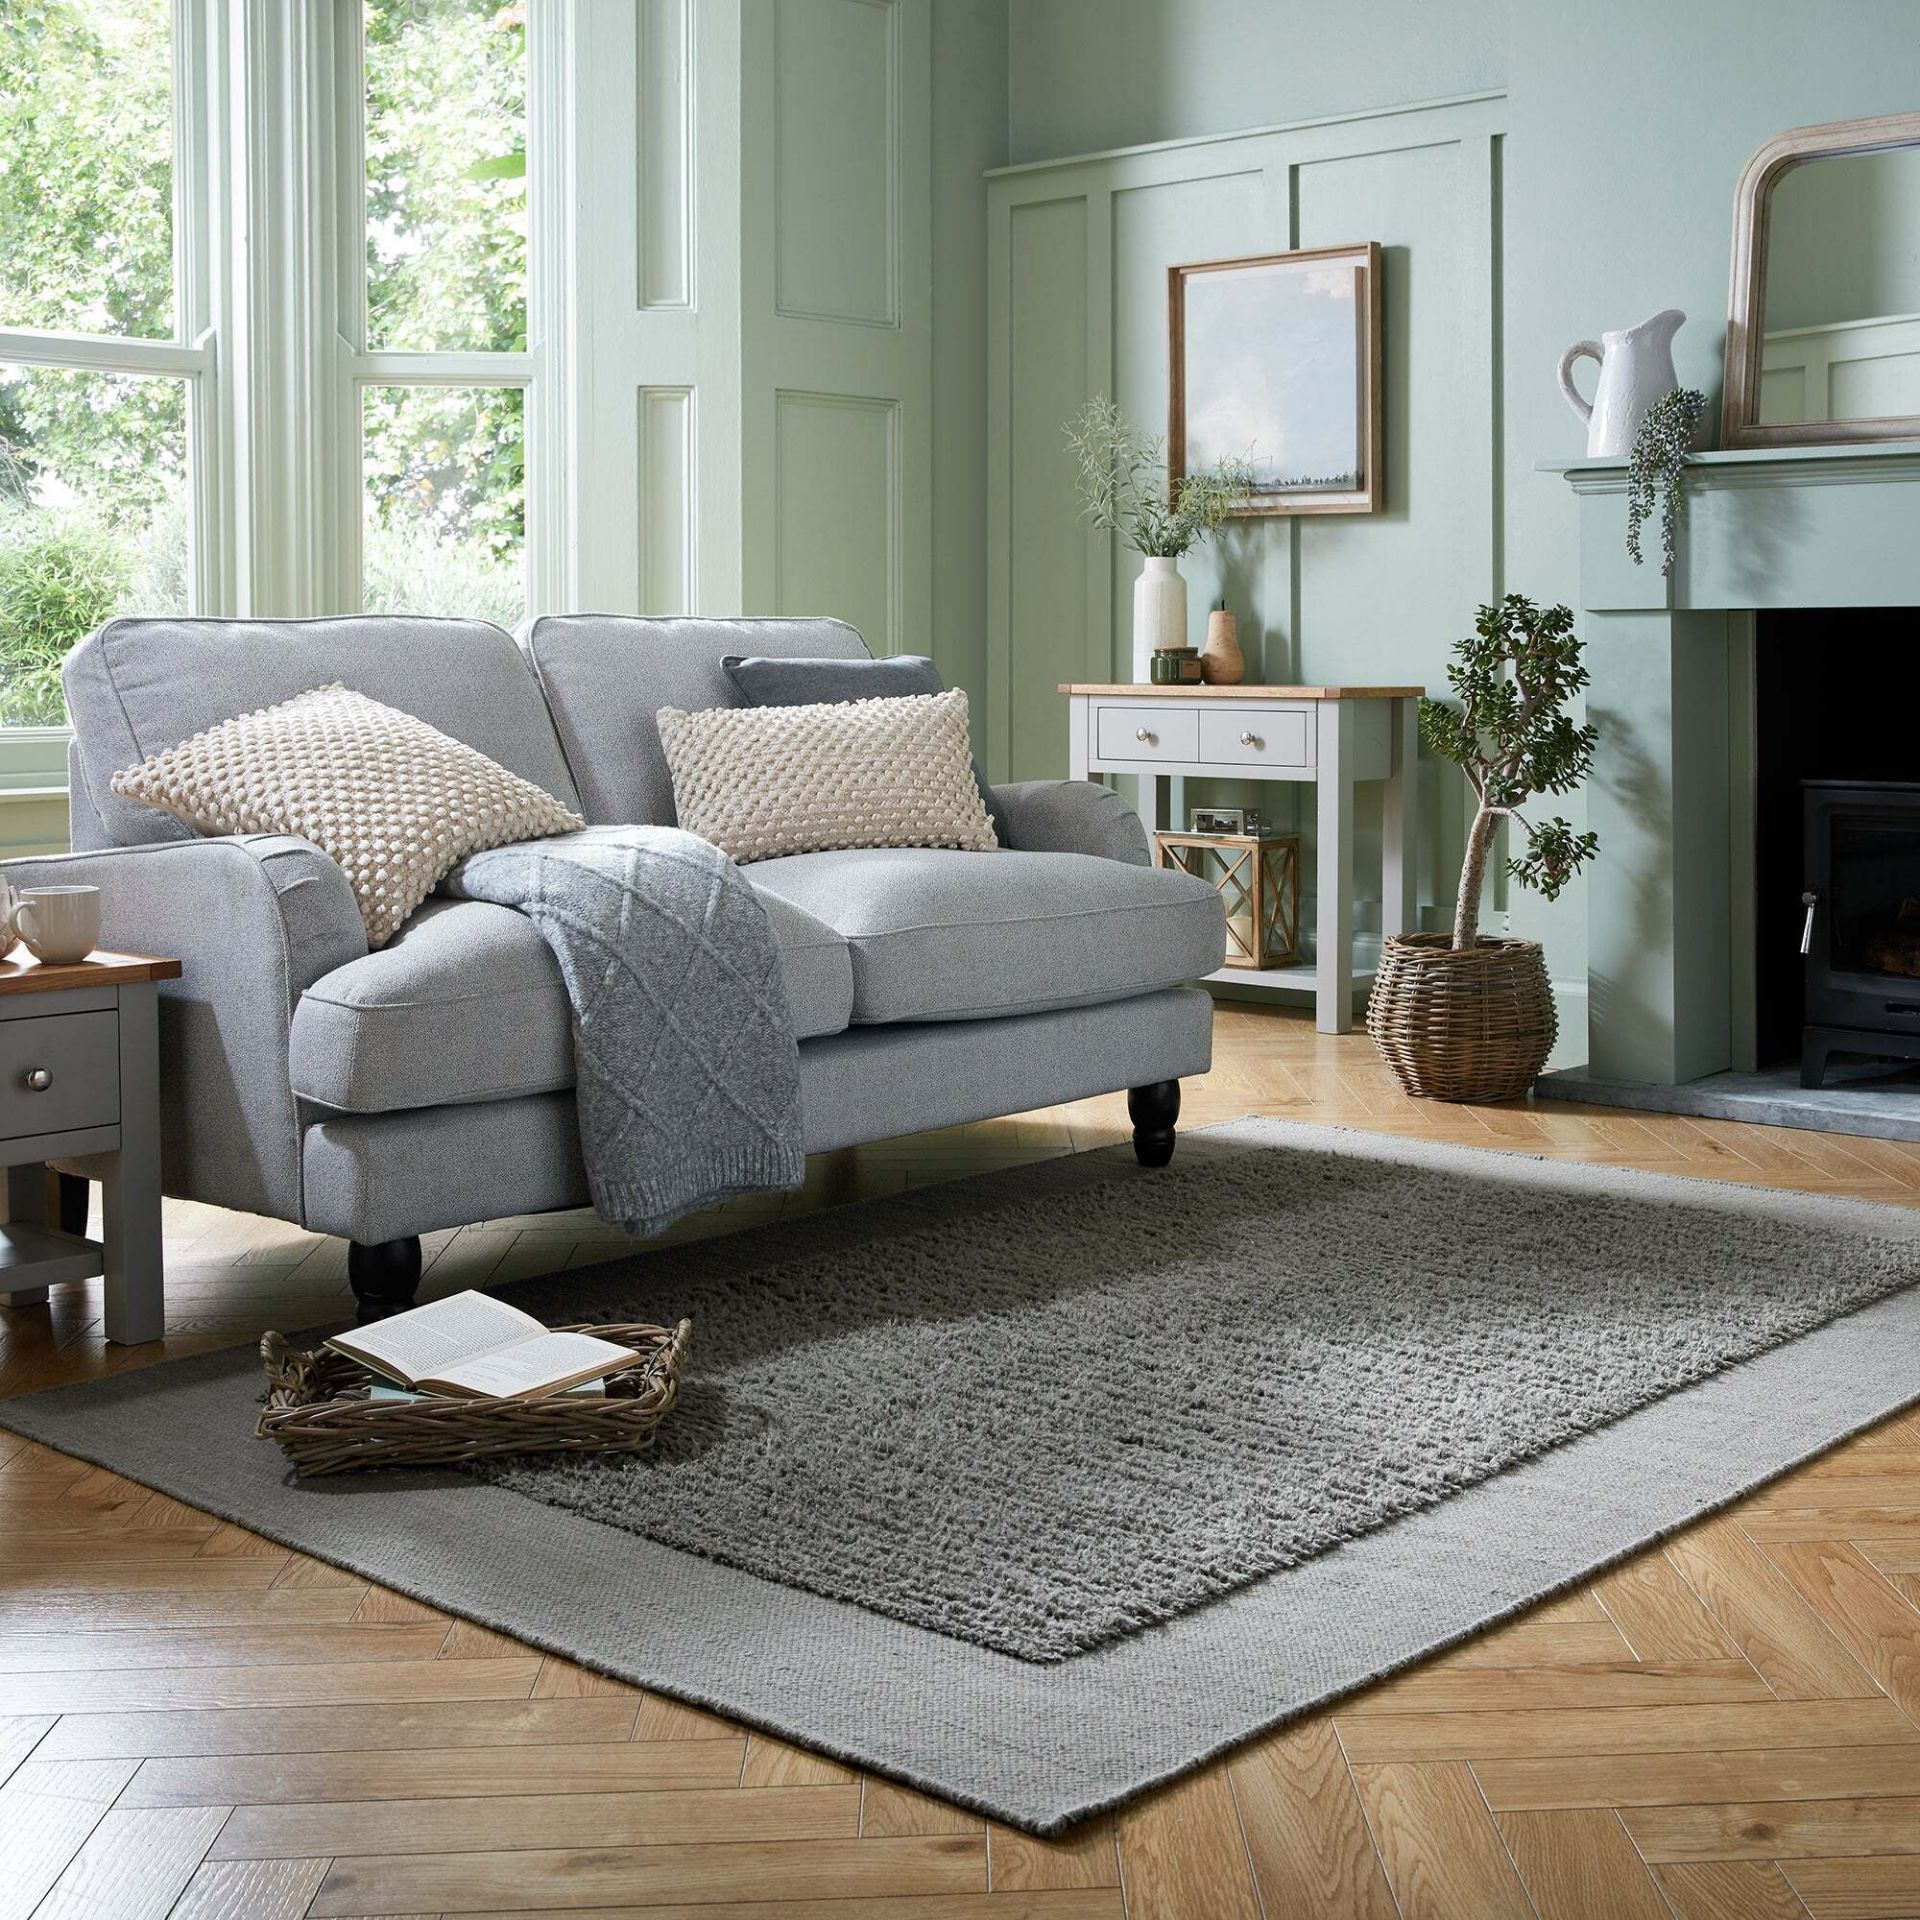 Femi D040 Rug Lina Wool Rug Grey Rectangle 160X230cm RRP 249 About the Product(s) Femi D040 Rug Lina - Image 2 of 3